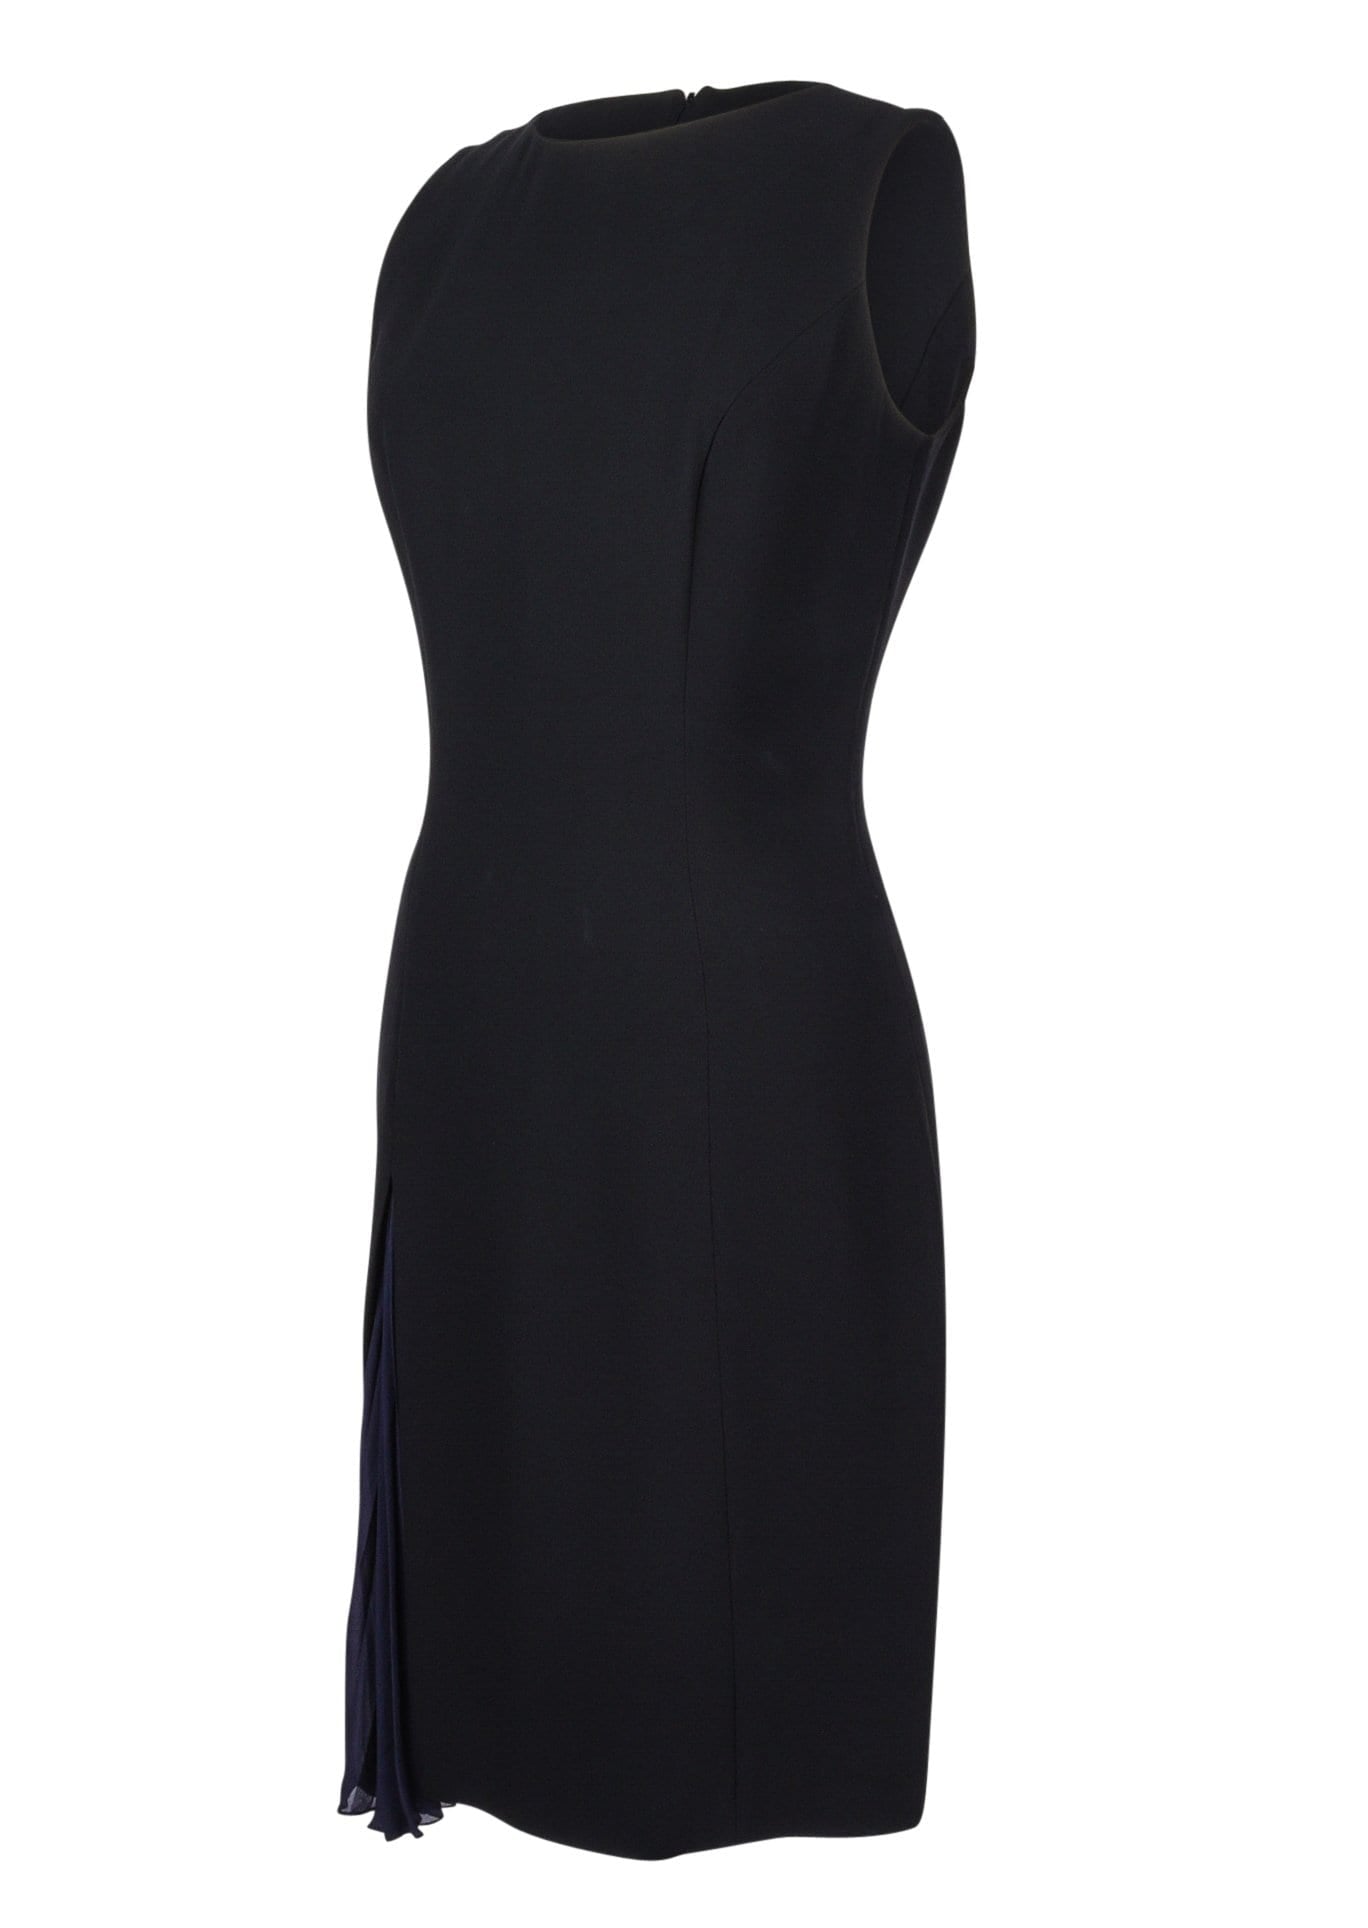 Christian Dior Dress Black Navy Pleated Inset Detail fits 8